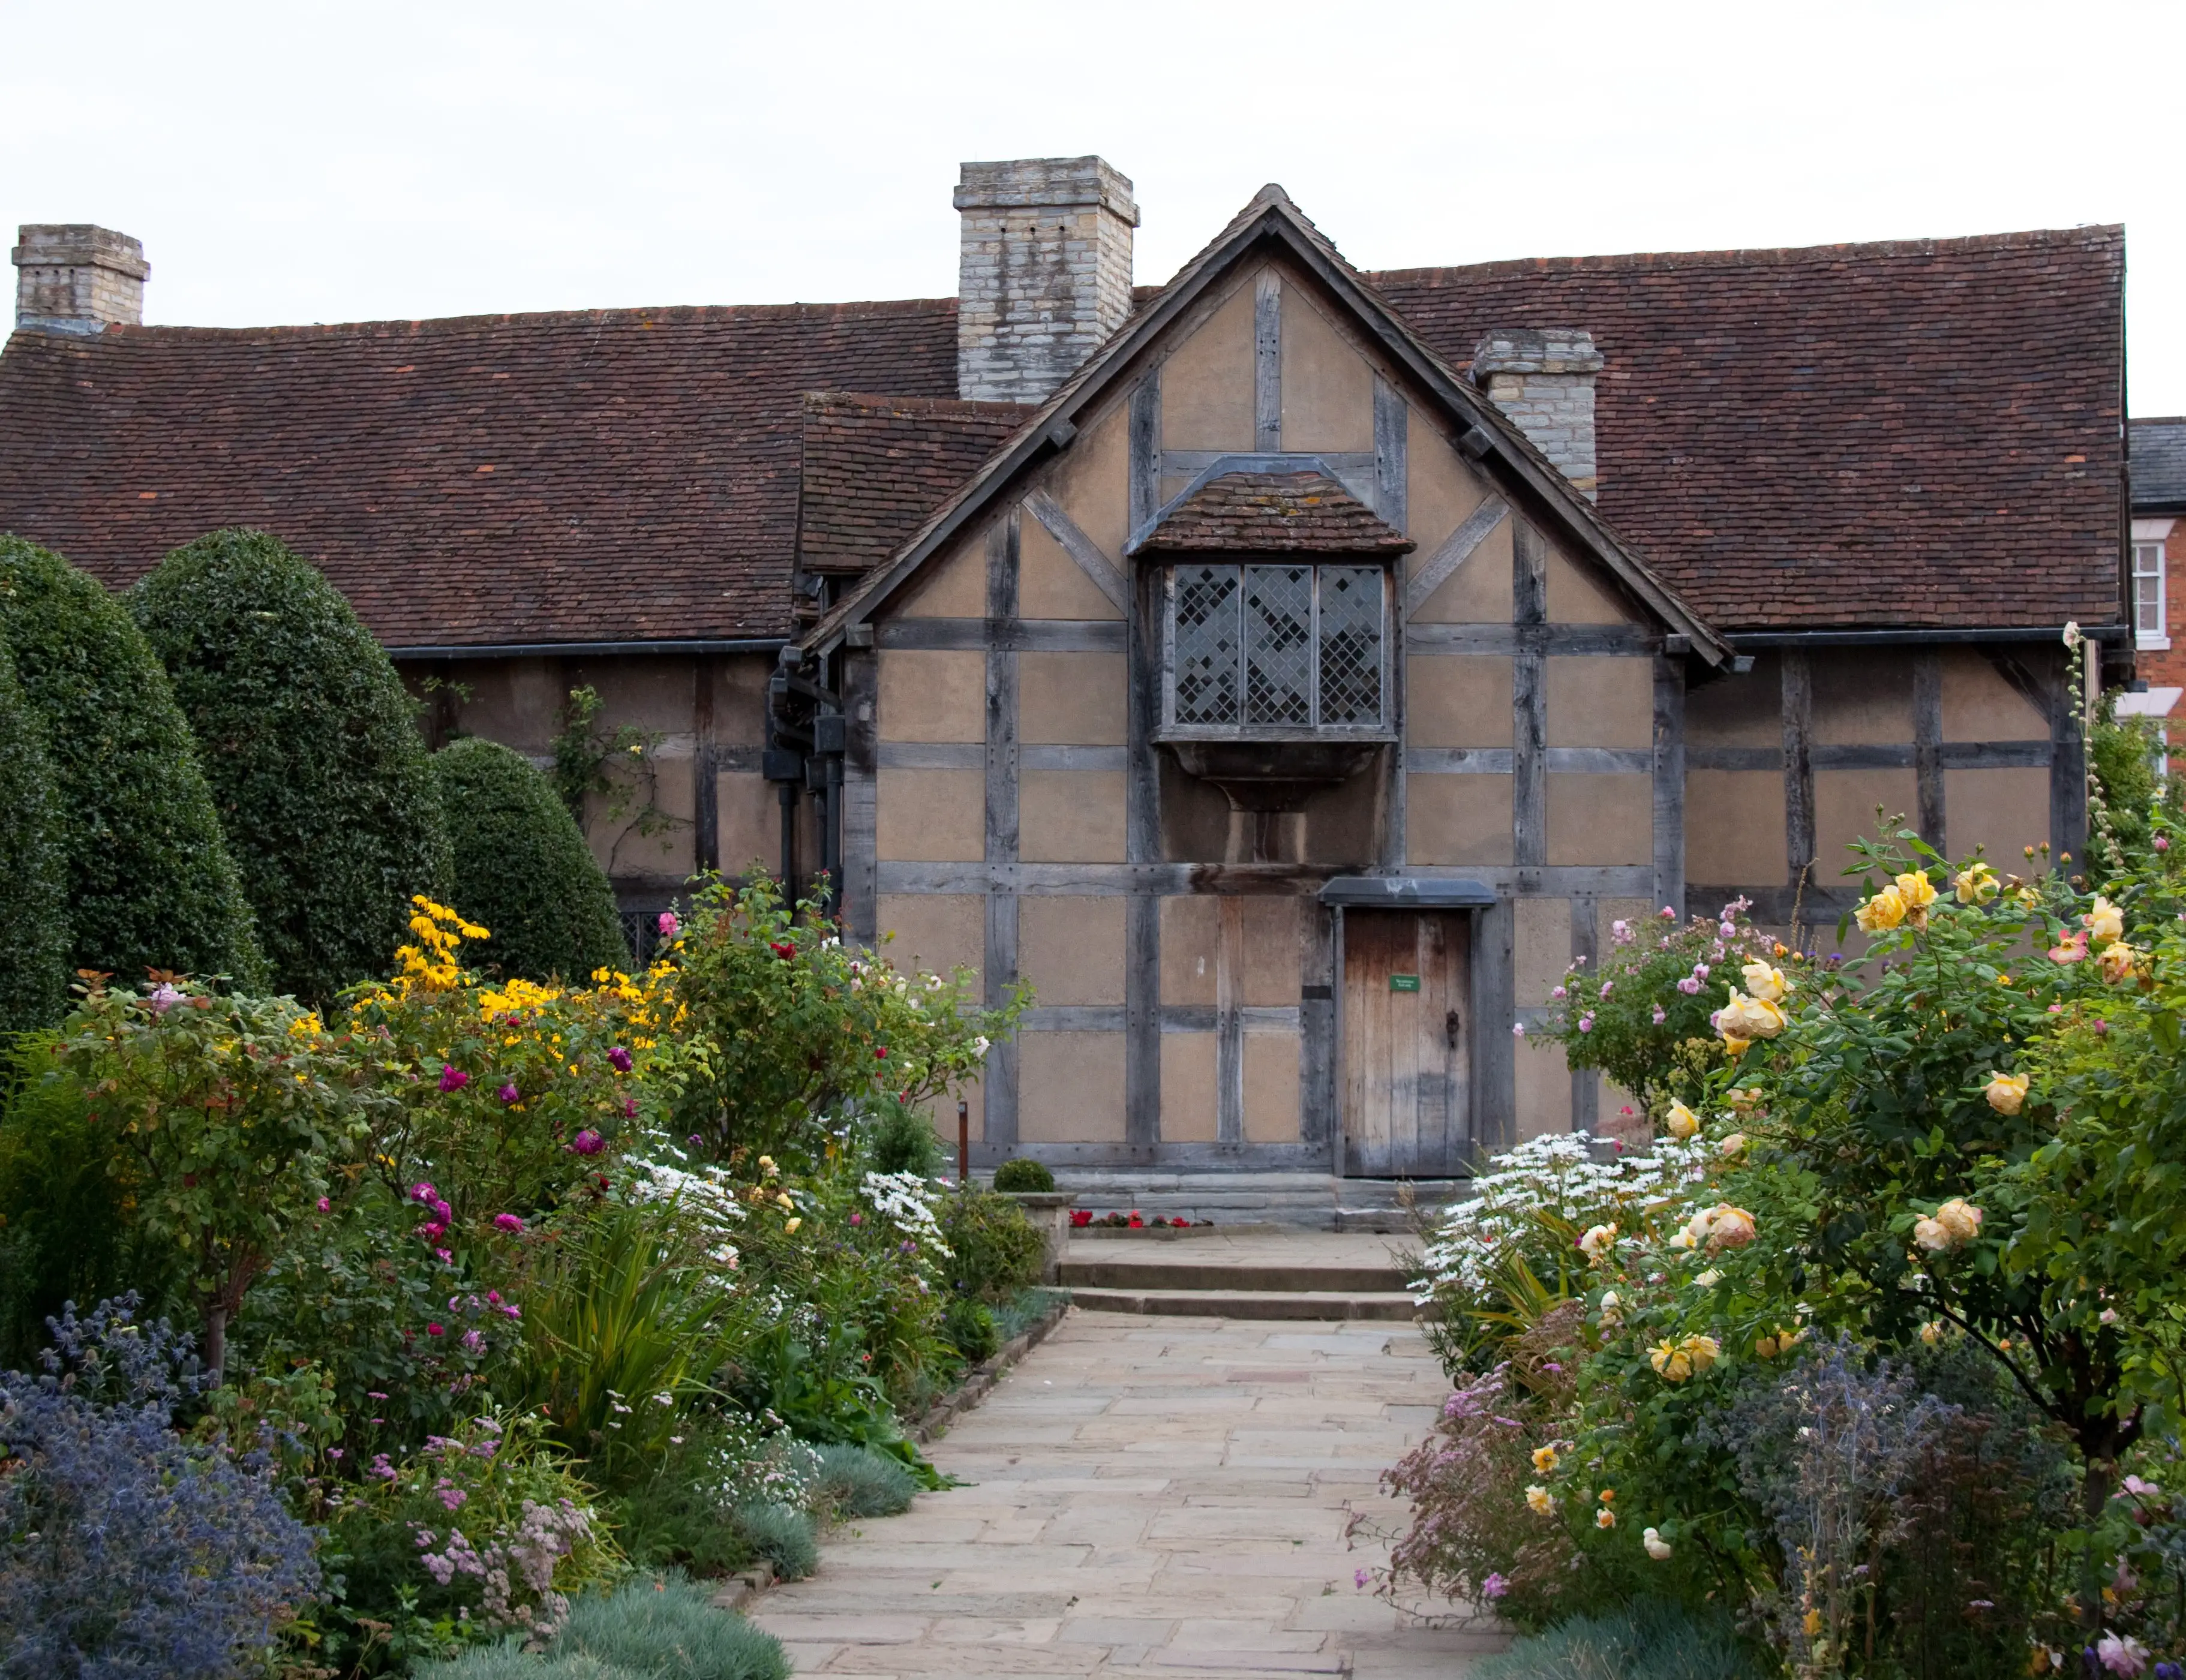 Shespeare's birthplace